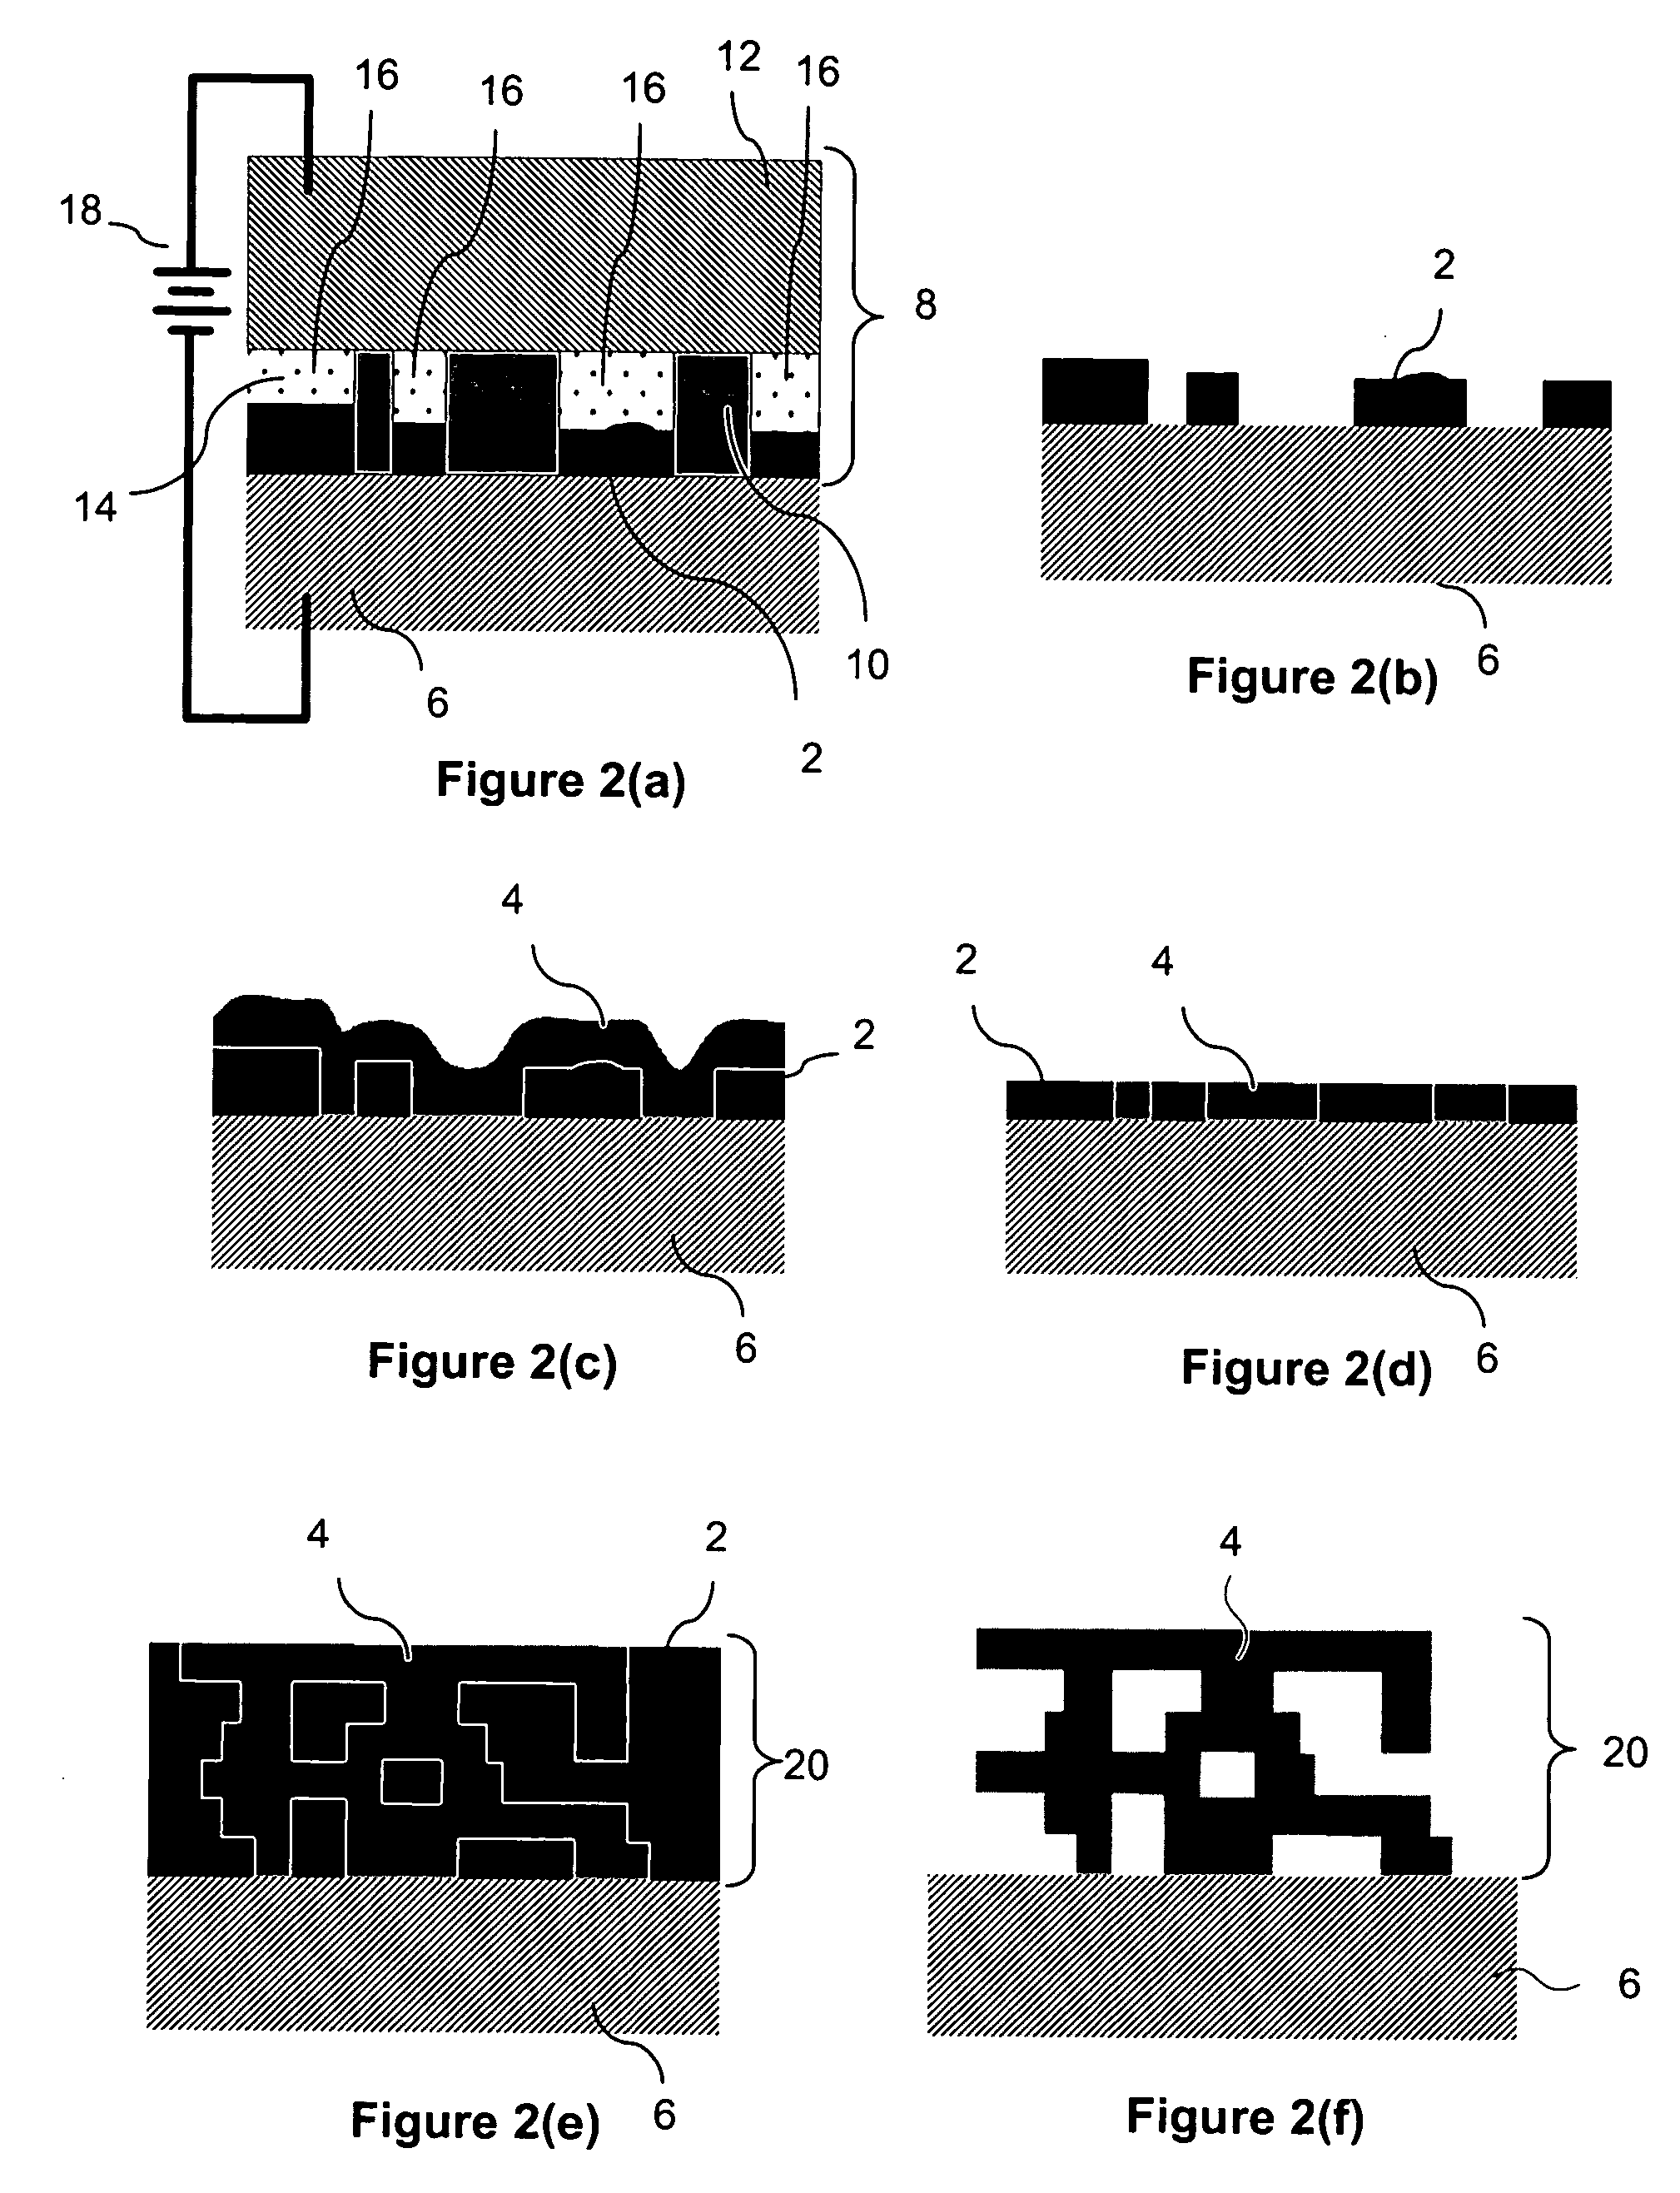 Methods for electrochemically fabricating structures using adhered masks, incorporating dielectric sheets, and/or seed layers that are partially removed via planarization